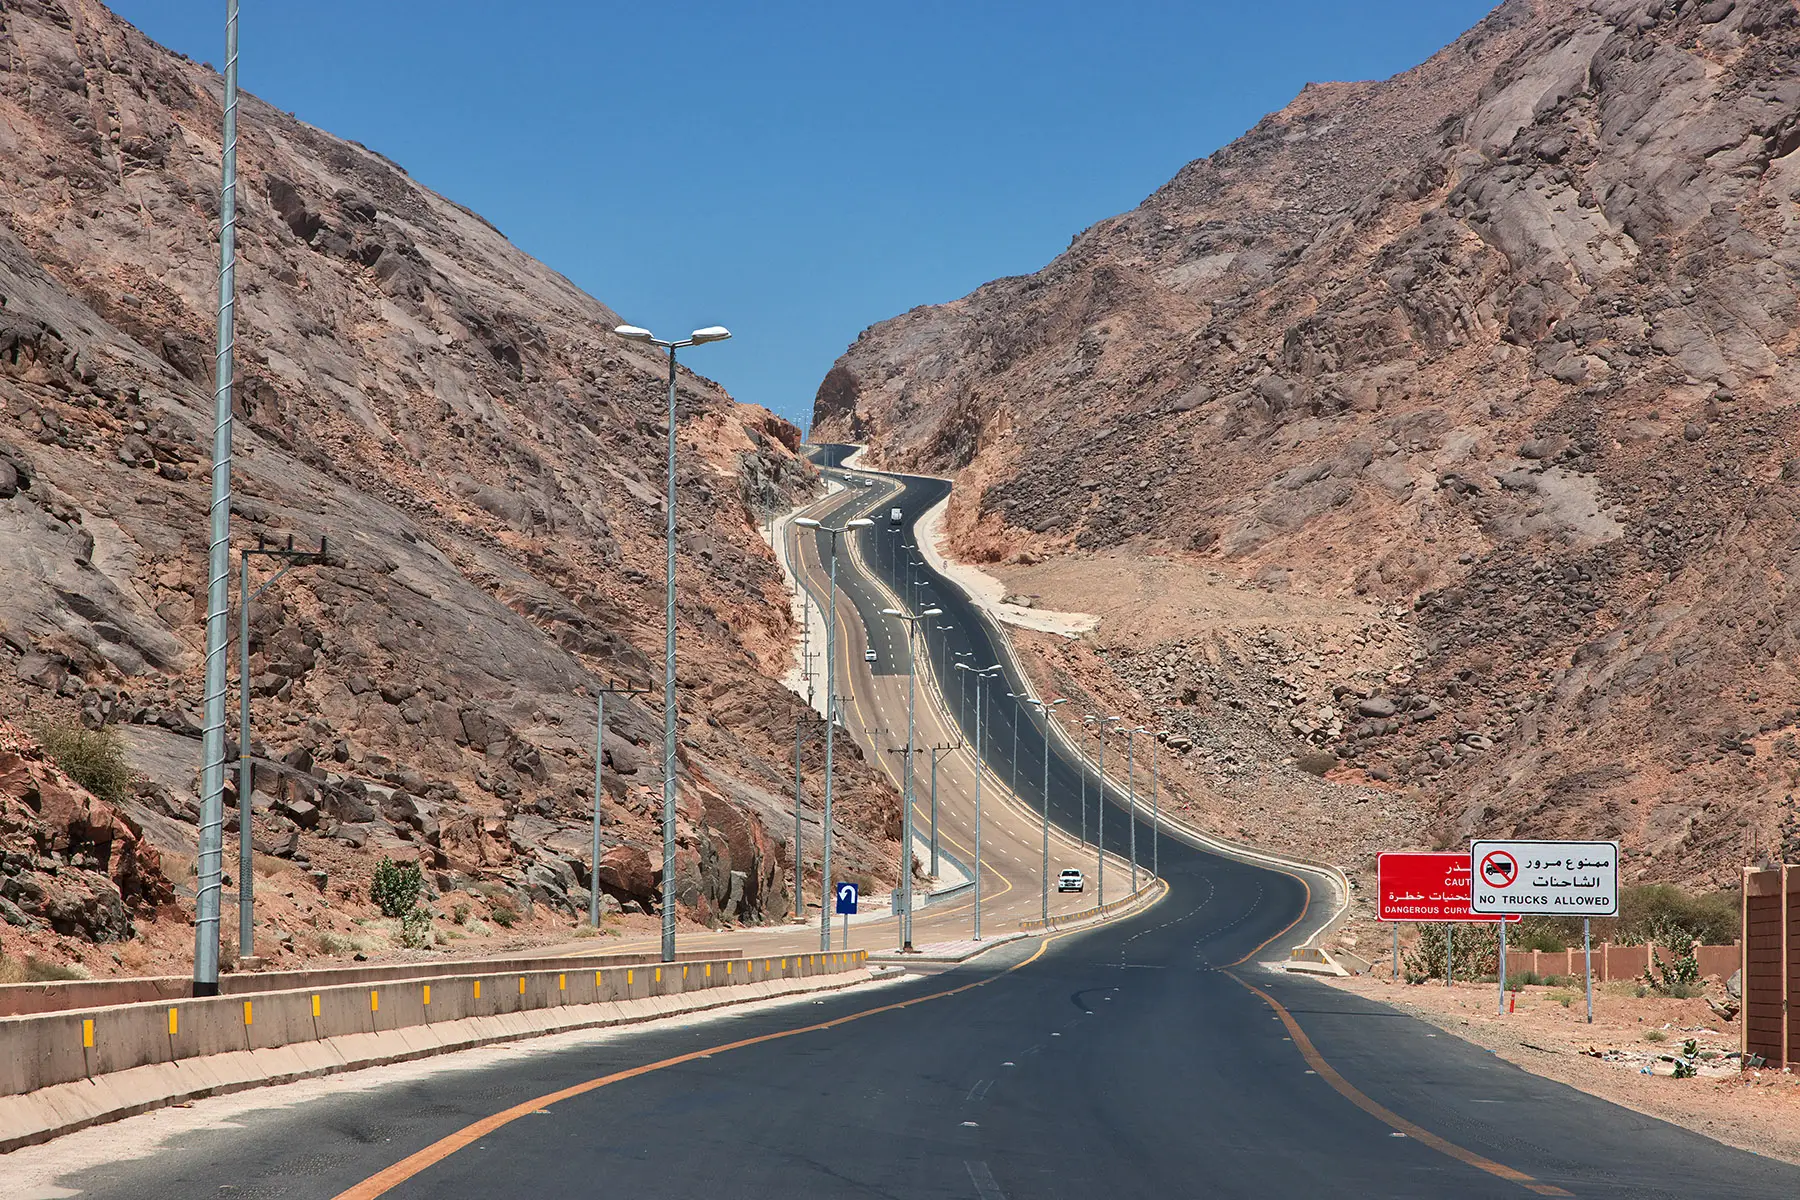 A highway in the mountains of the 'Asir region of Saudi Arabia